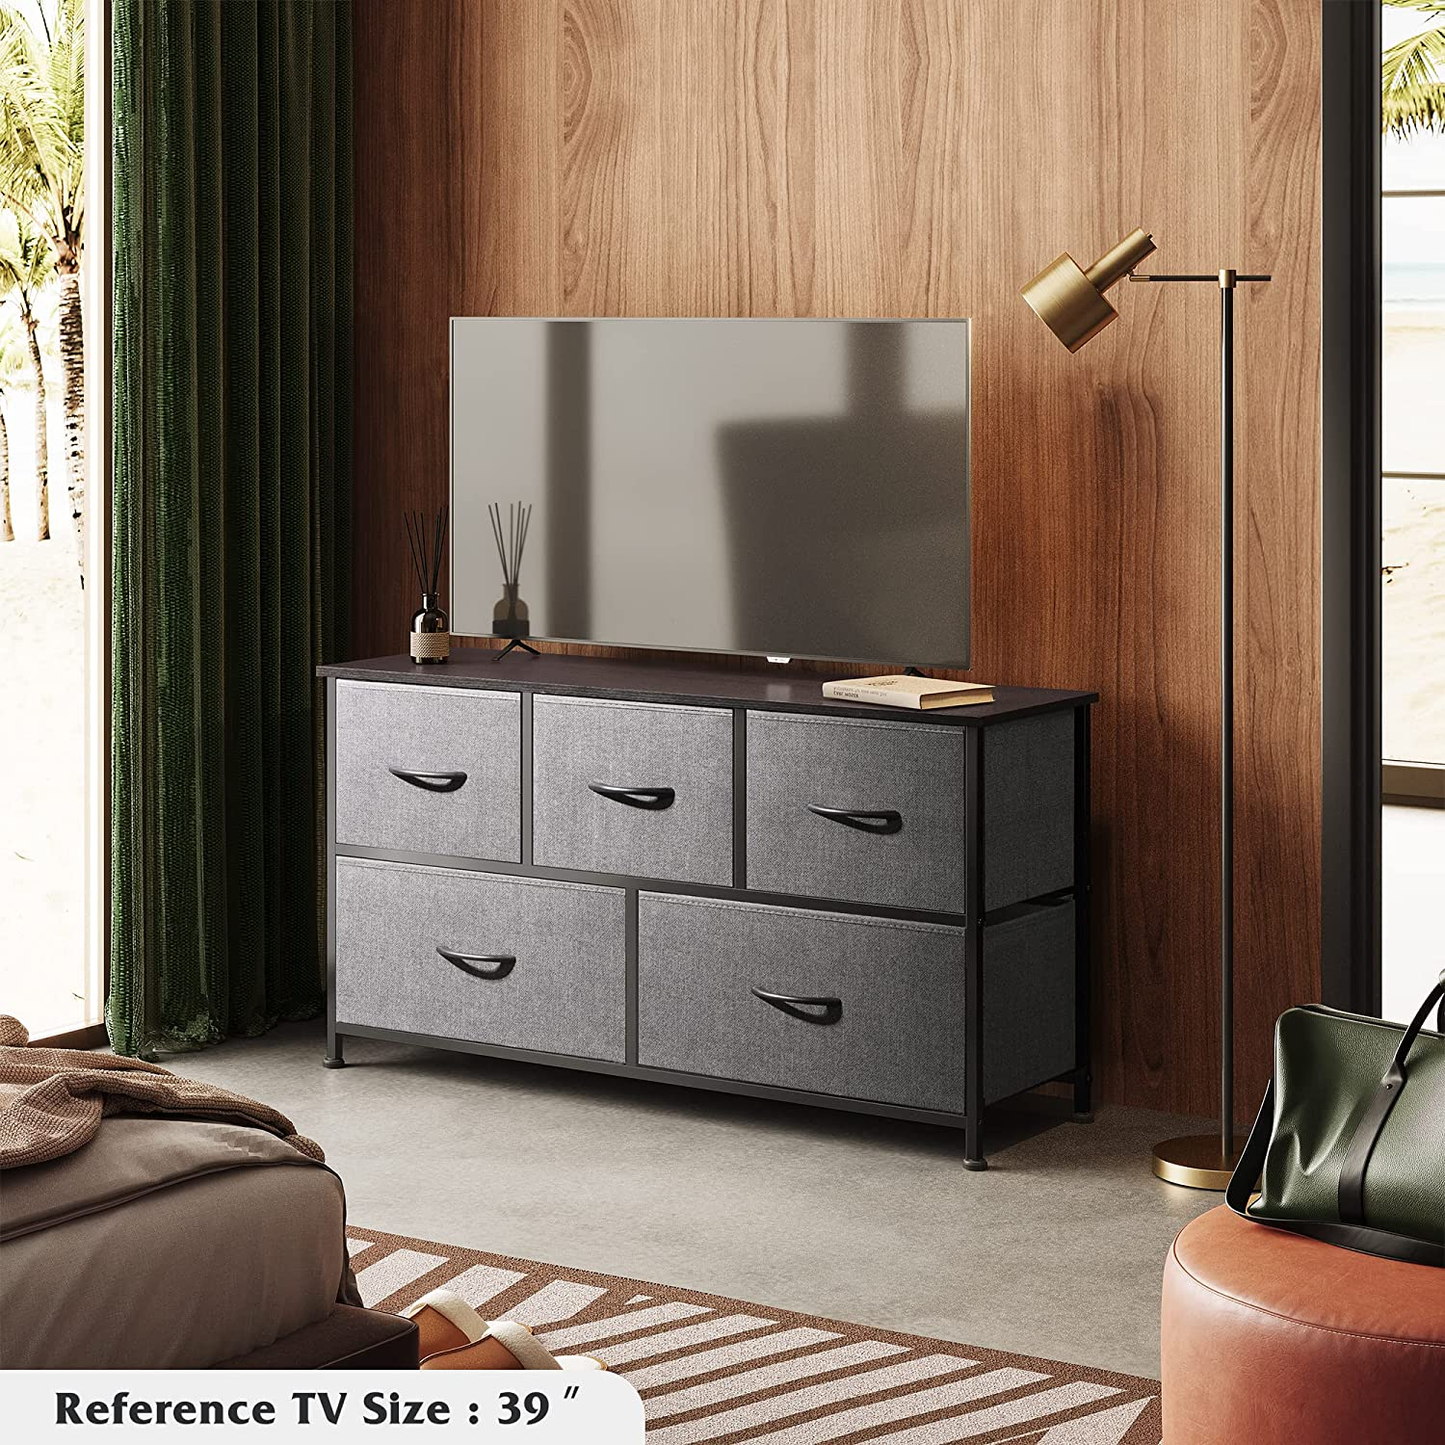 Dresser for Bedroom with 5 Drawers, Wide Chest of Drawers, Fabric Dresser, Storage Organizer Unit with Fabric Bins for Closet, Living Room, Hallway, Nursery, Dark Grey